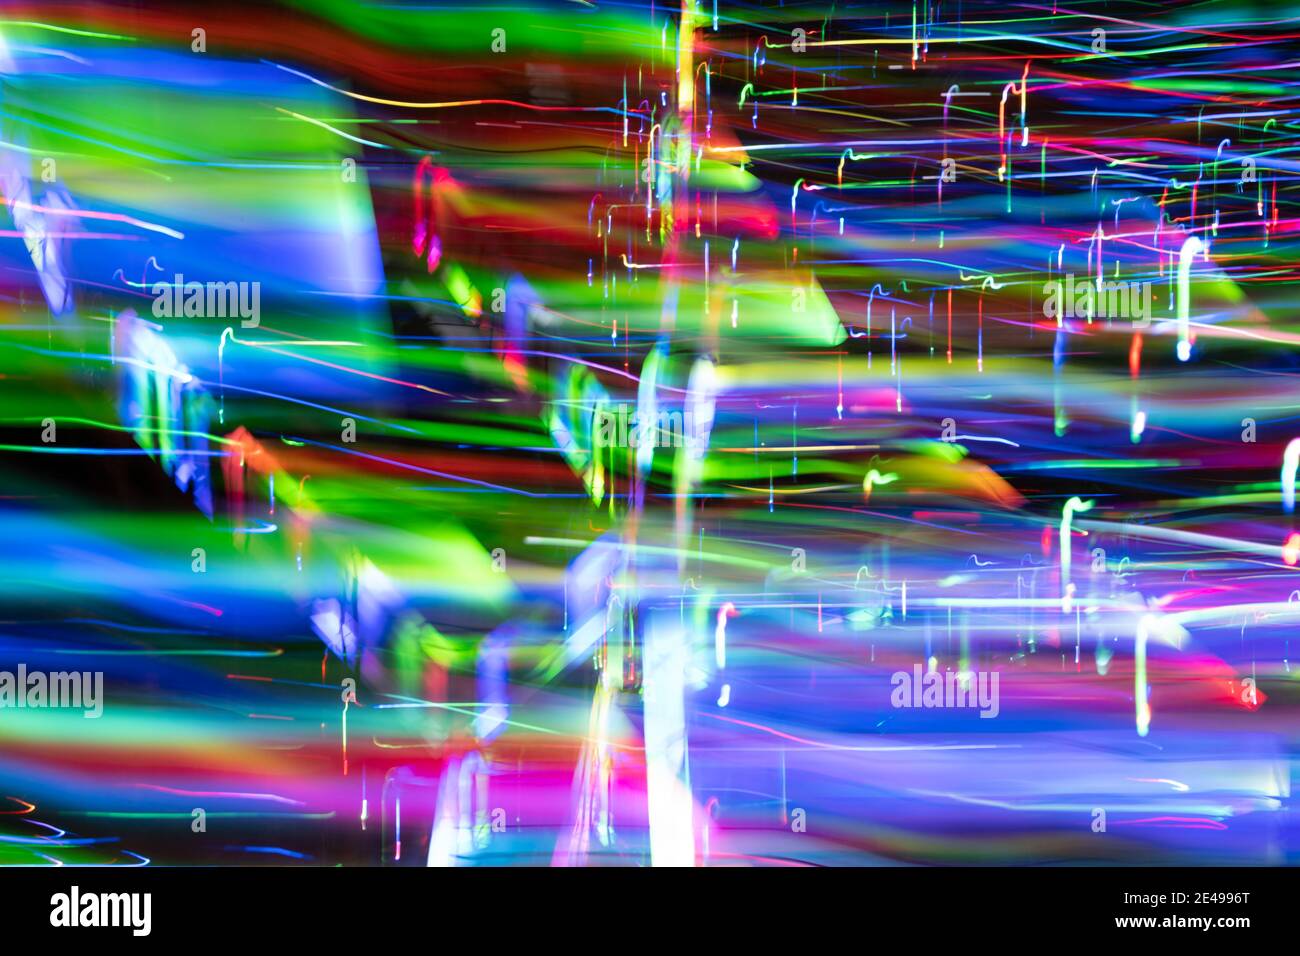 Spectrum effect in vivid chaotic layers created by LED lights photographed outdoors at night. Stock Photo